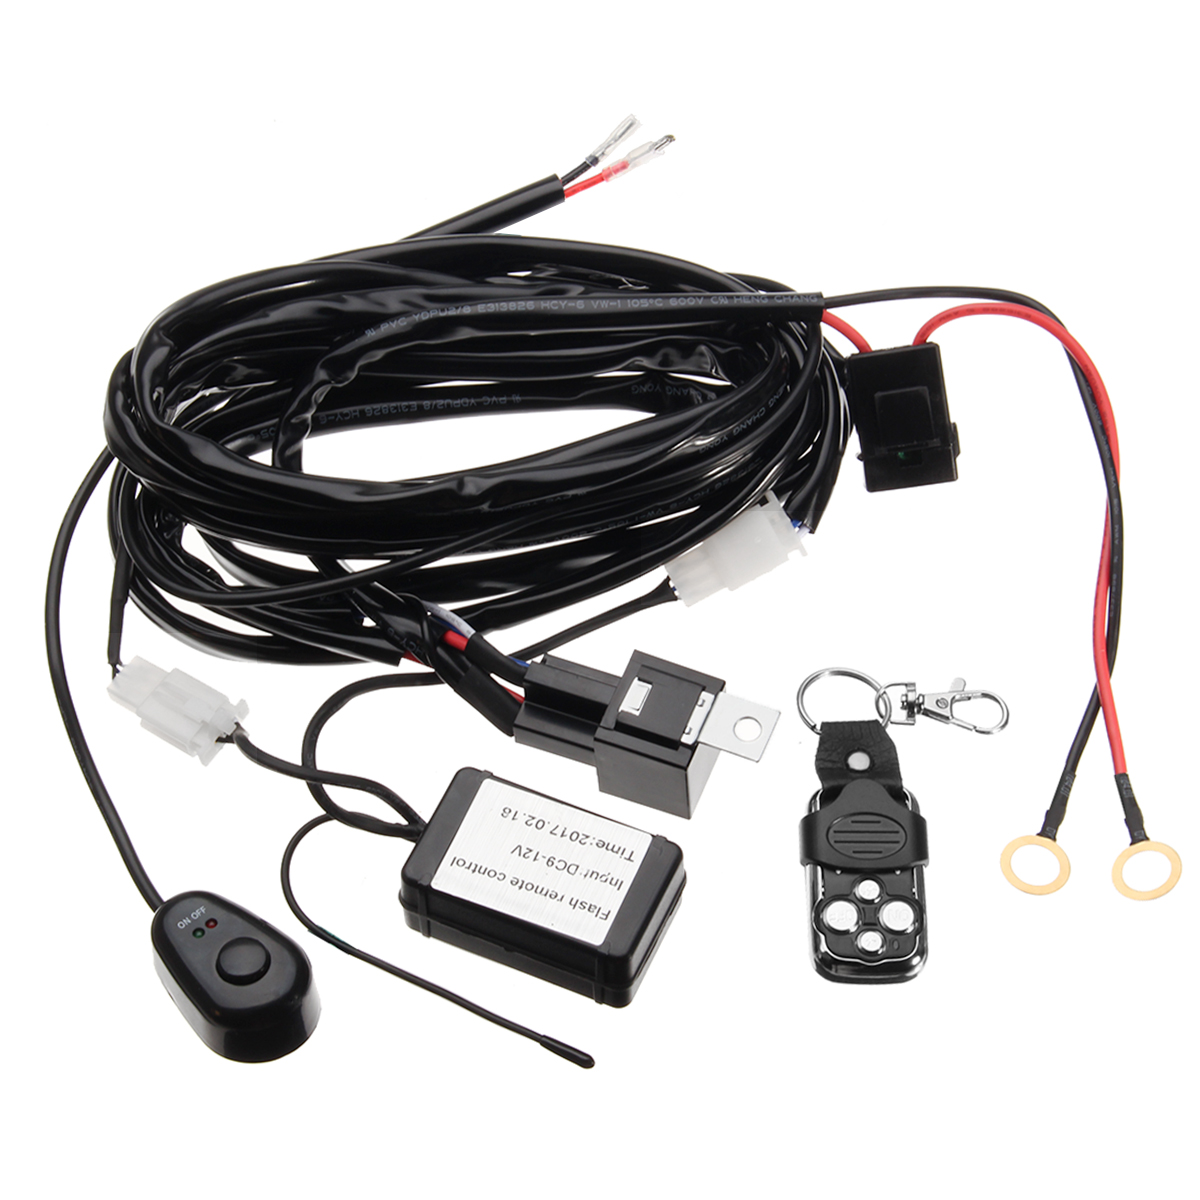 12V-Wiring-Kit-With-Wireless-Remote-Control-Transmitter-For-LED-Light-Bar-ATV-SUV-2Lead-1374206